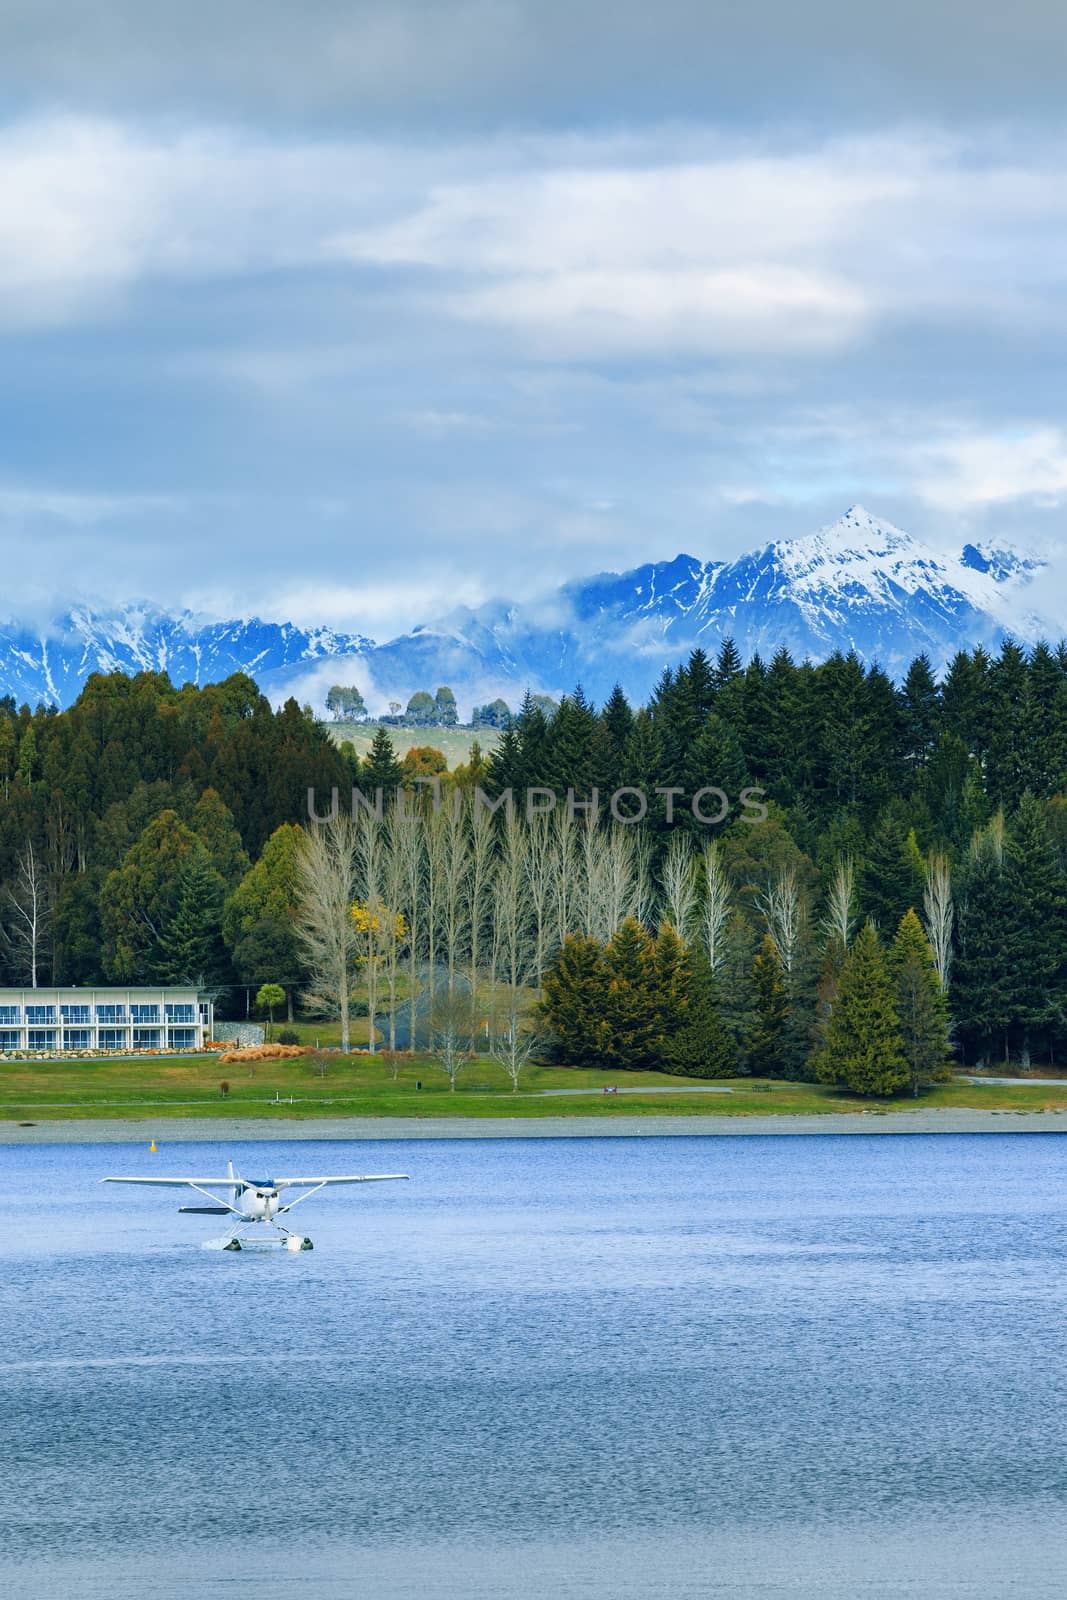 land scape and natural mountain view point of lake te anau south island new zealand